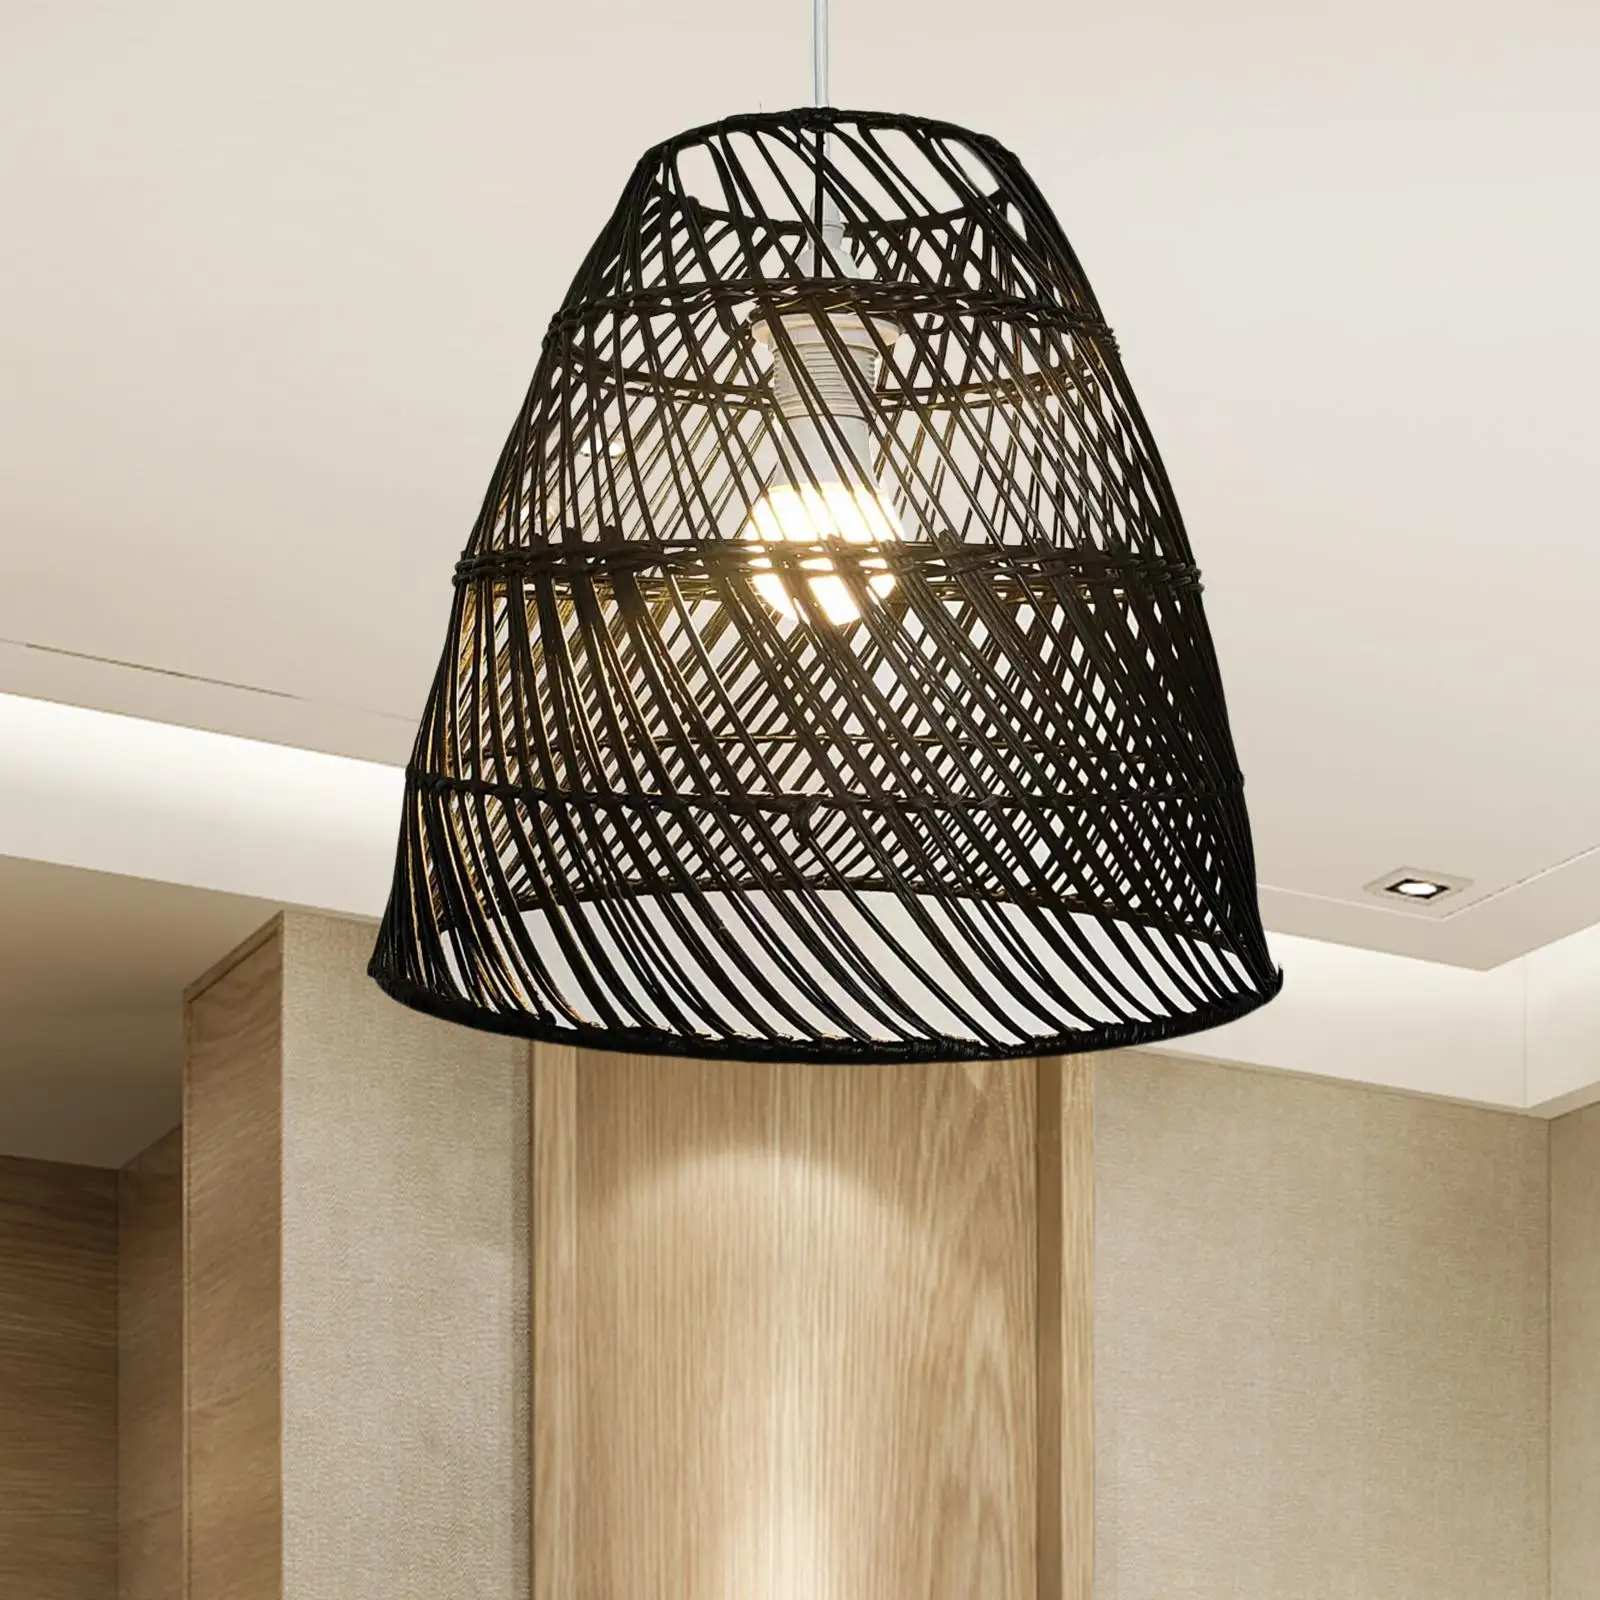 Rattan Woven Lamp Shade Retro Woven Pendant Lampshade Hanging Light Cover for Kitchen Cafe Restaurant Bedroom Dining Room